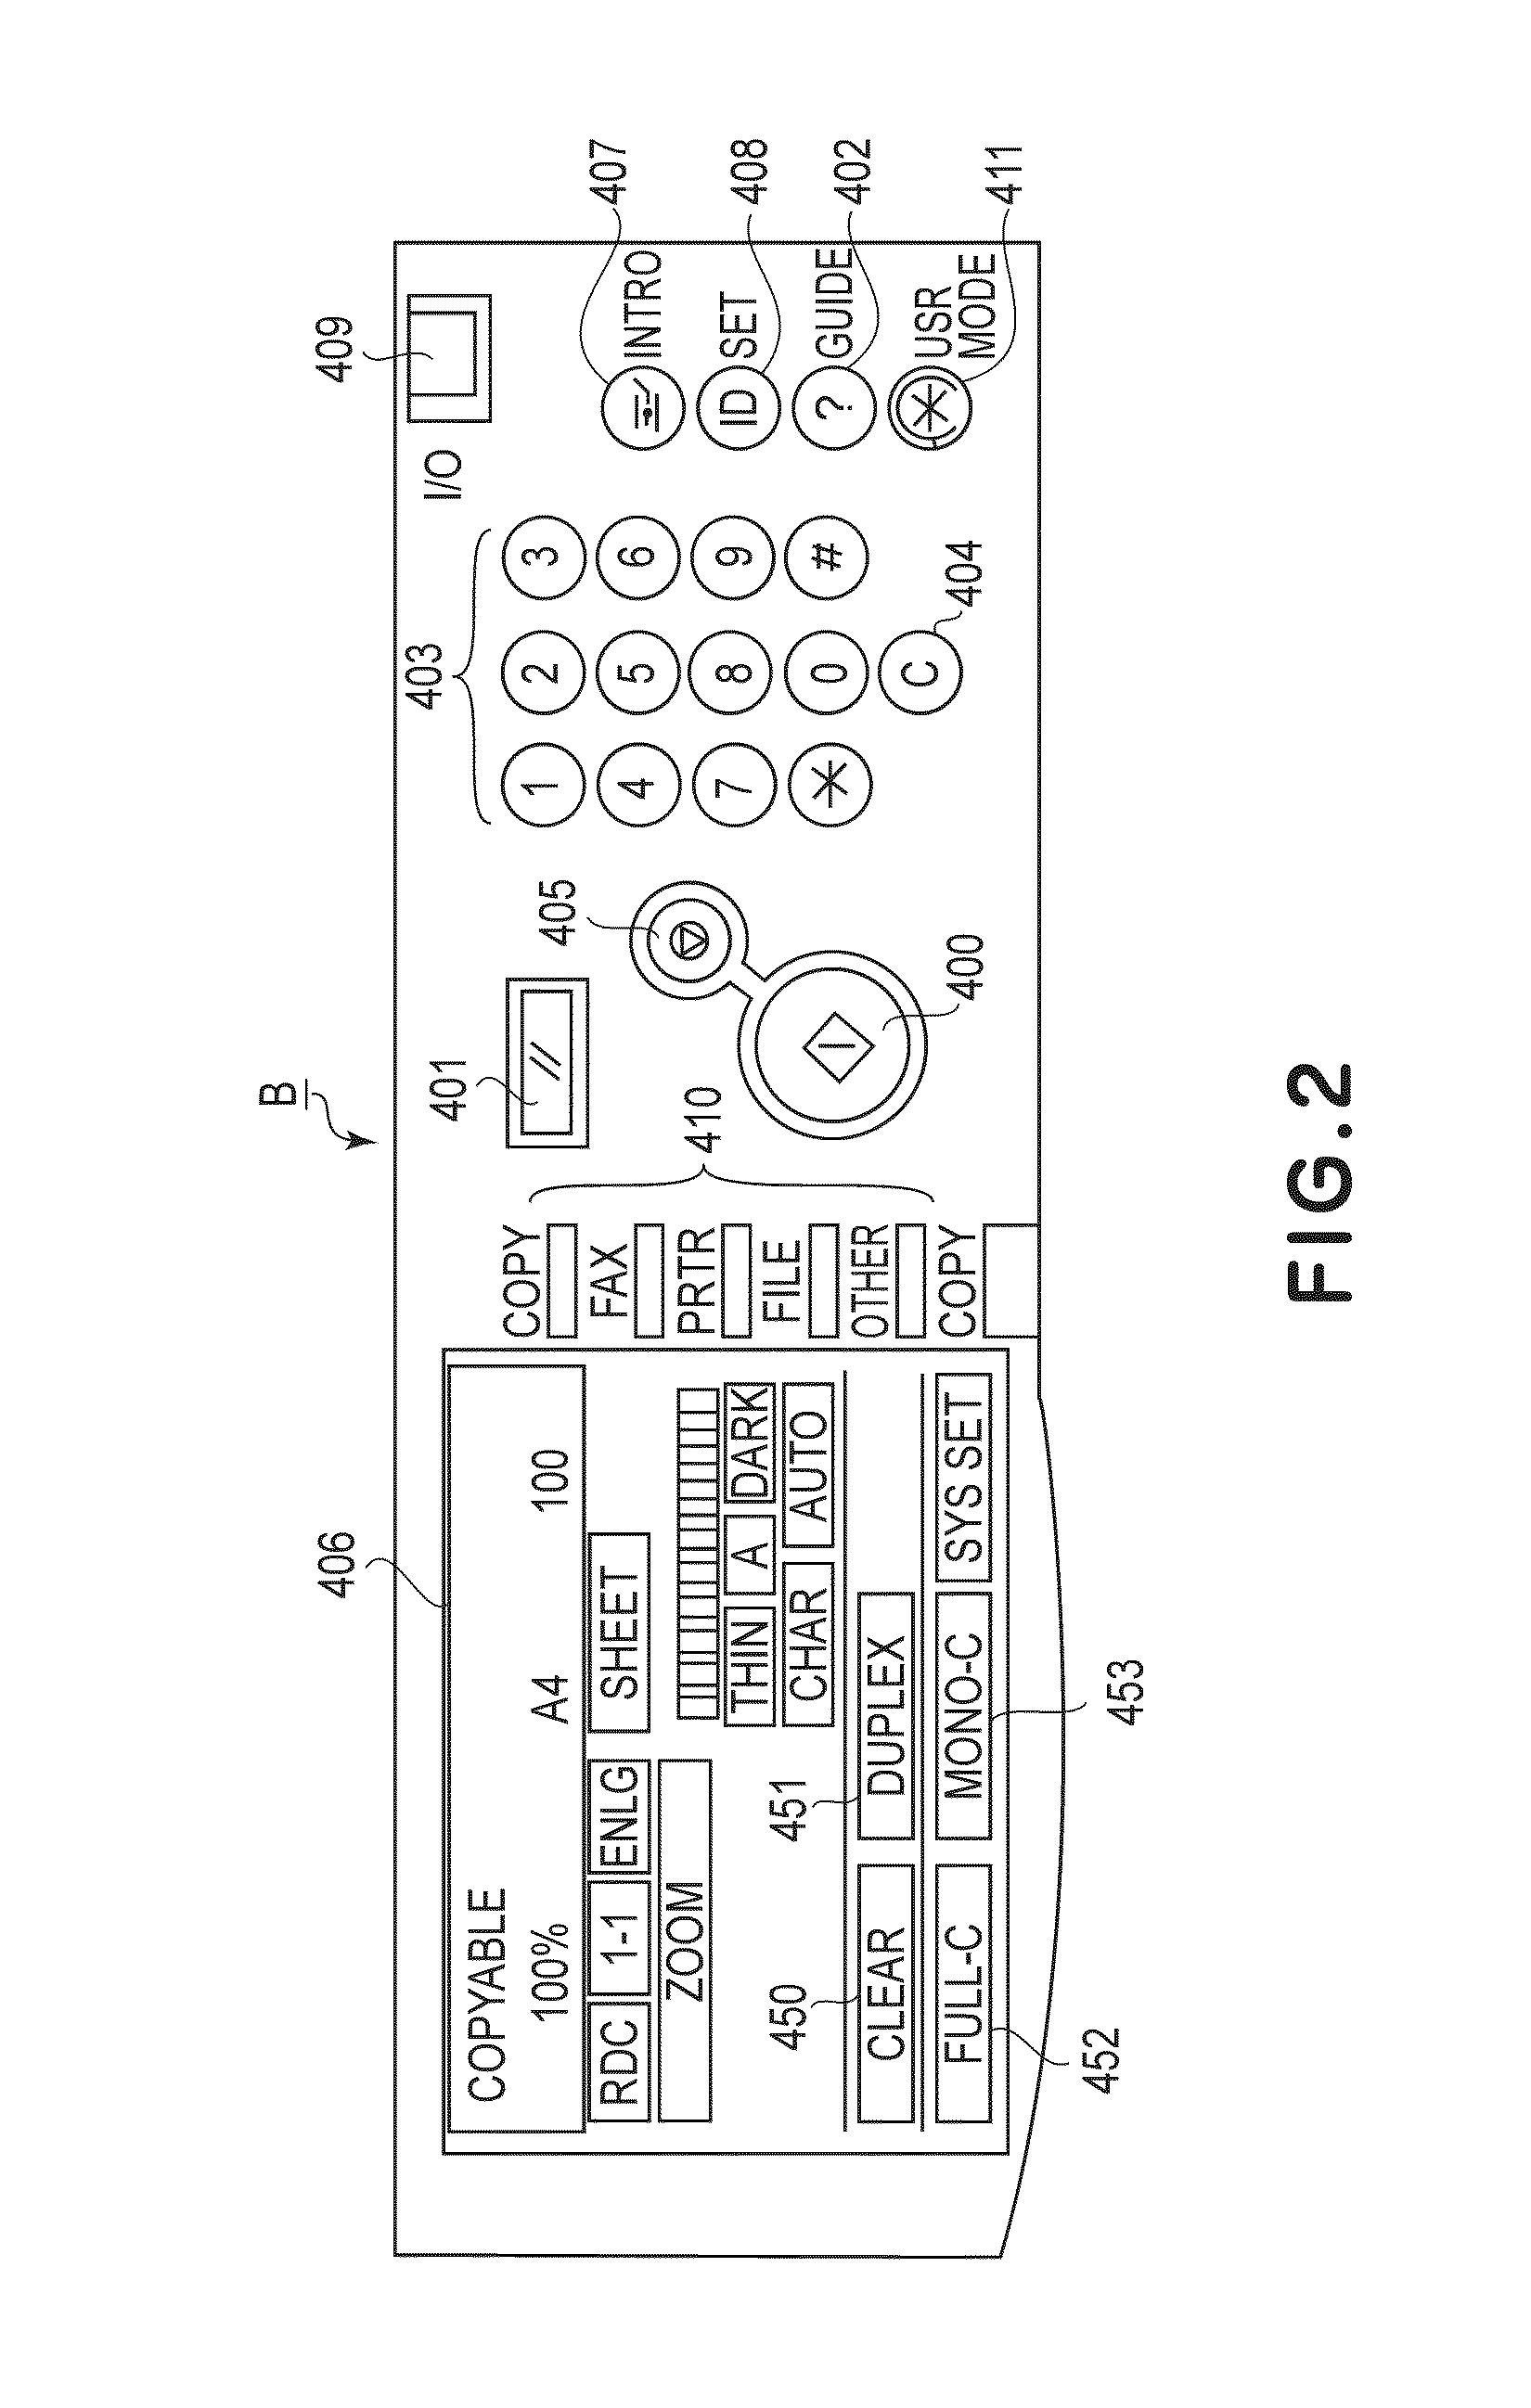 Image forming apparatus including an image area glossiness control feature